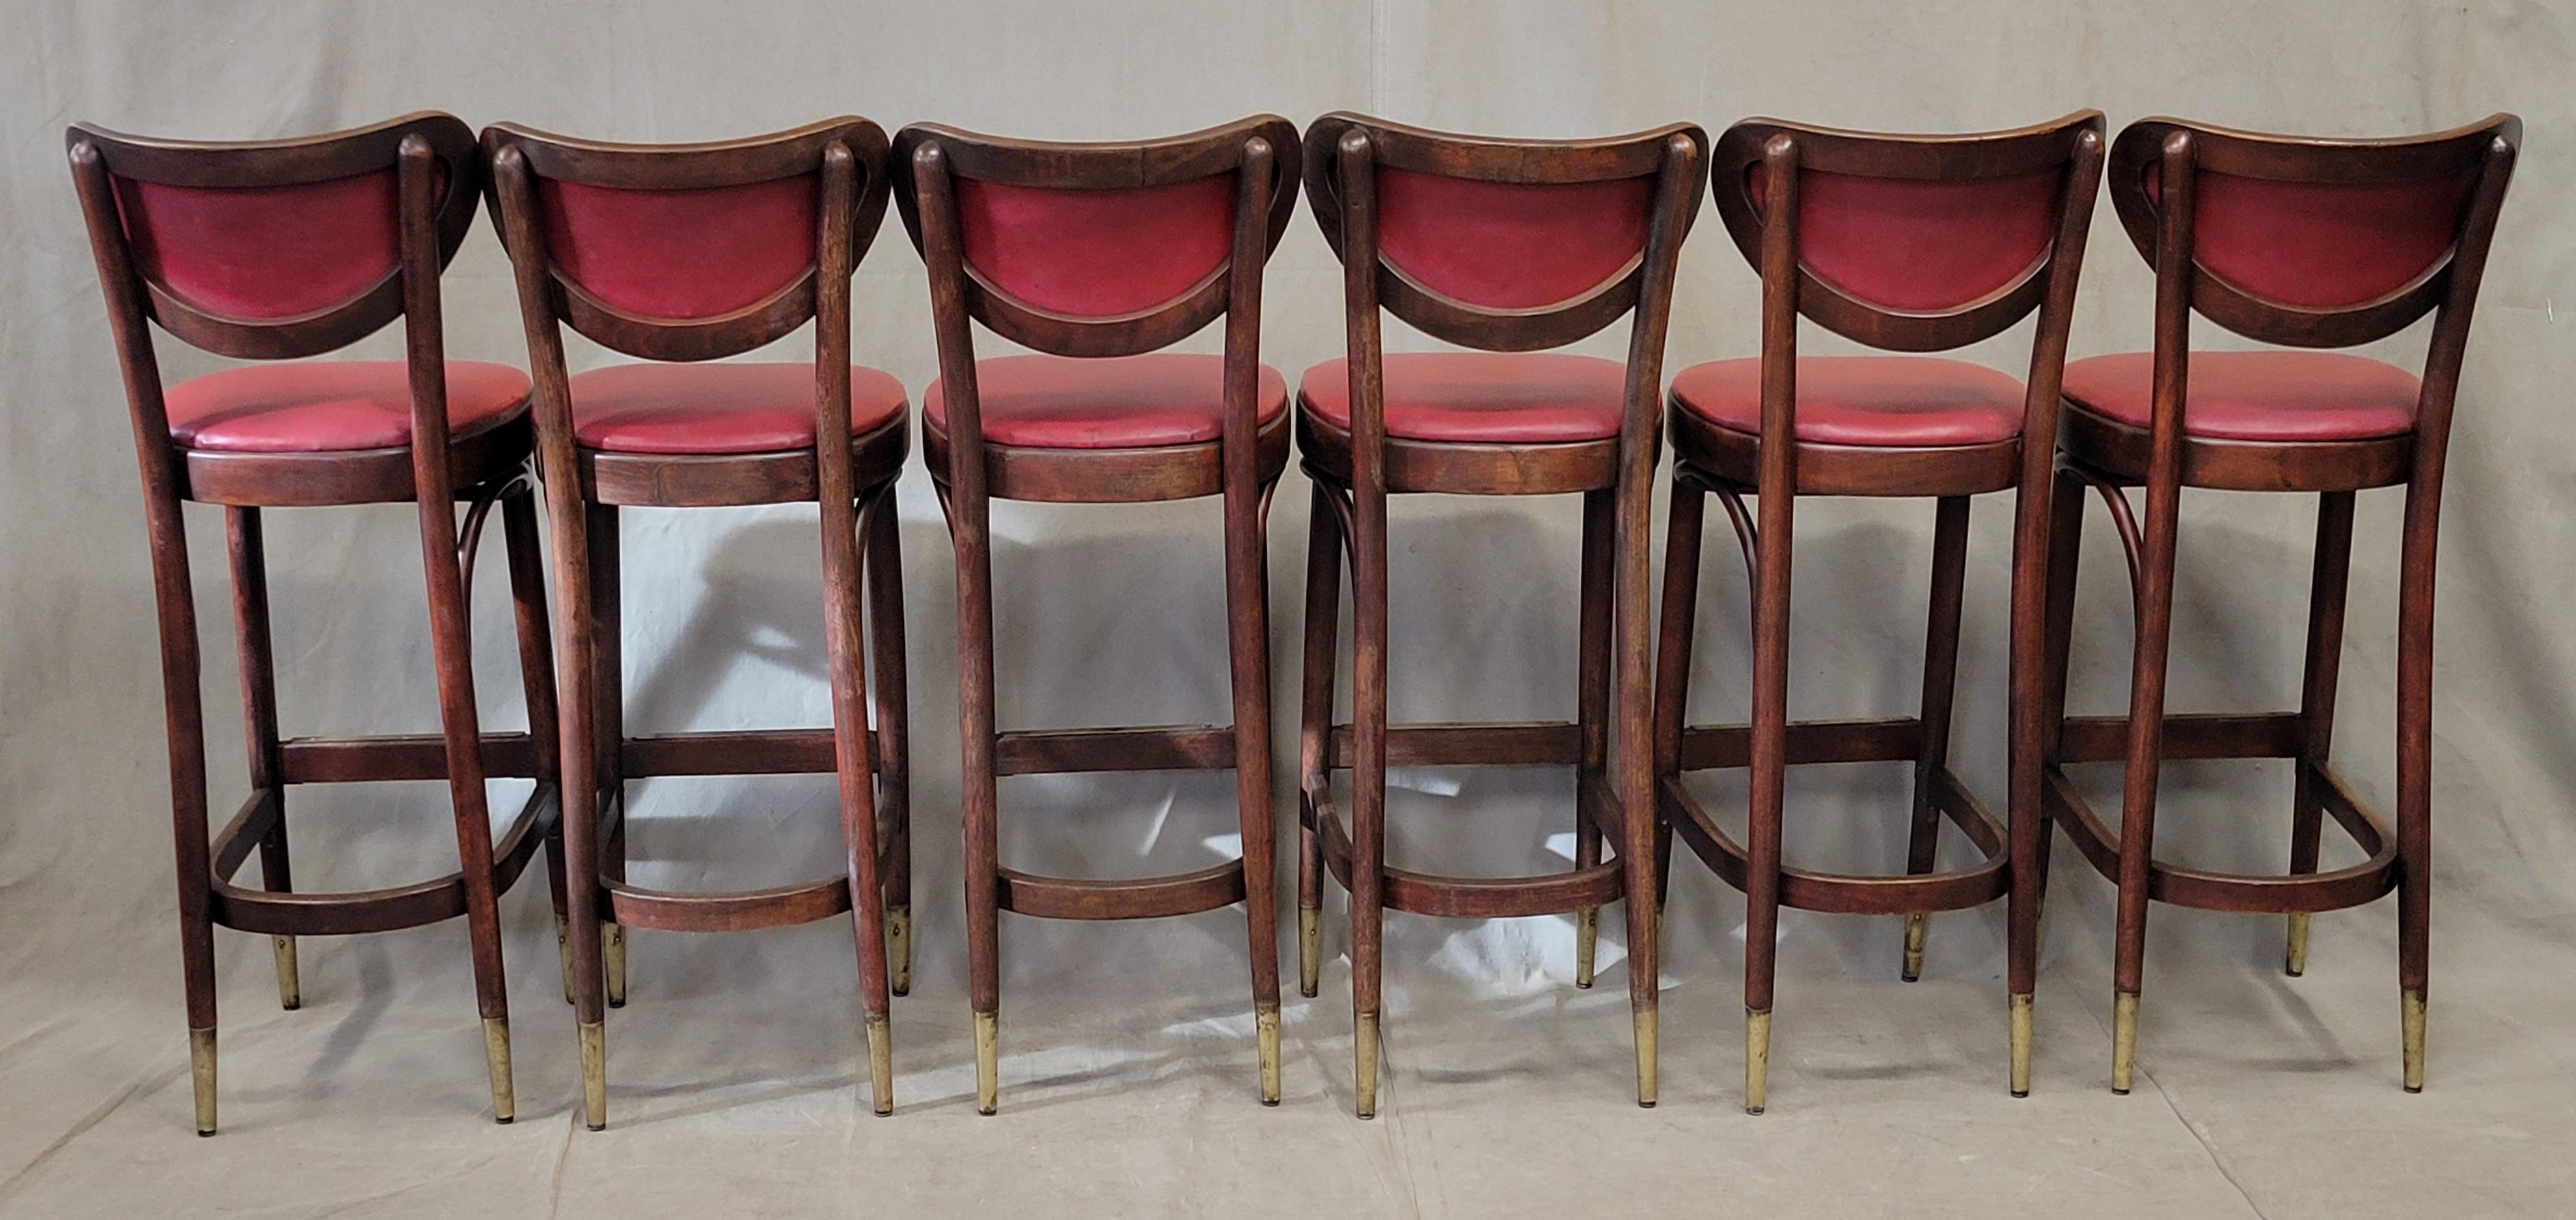 Art Deco Vintage Bentwood Bar Stools with Original Ruby Red Vinyl and Brass Accents